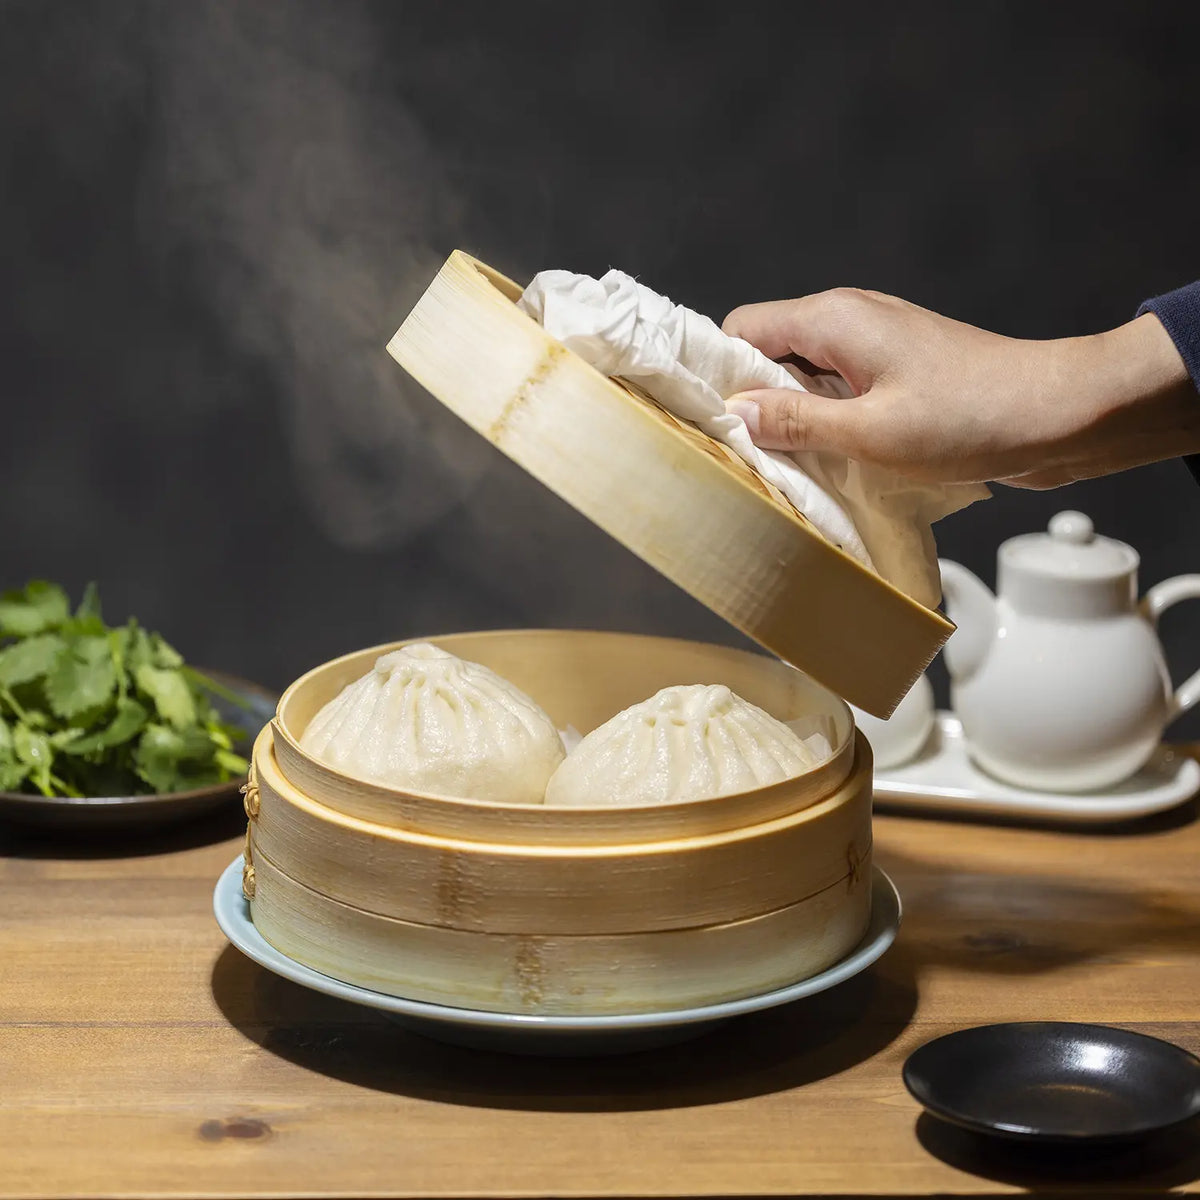 Traditional Bamboo Steamer 10 Inch - World Market